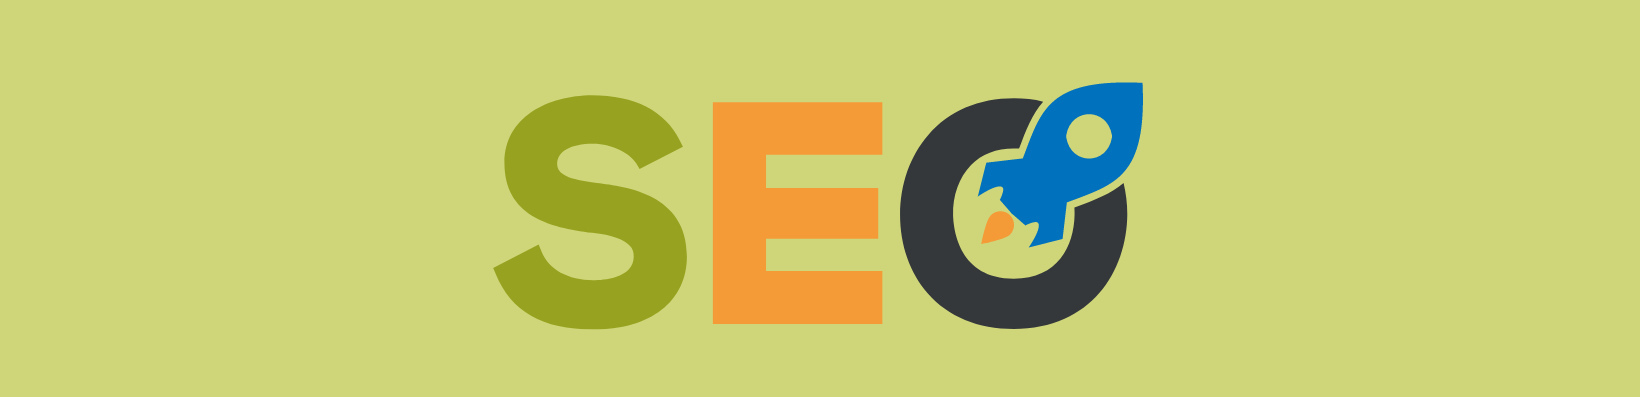 SEO for an advertising company